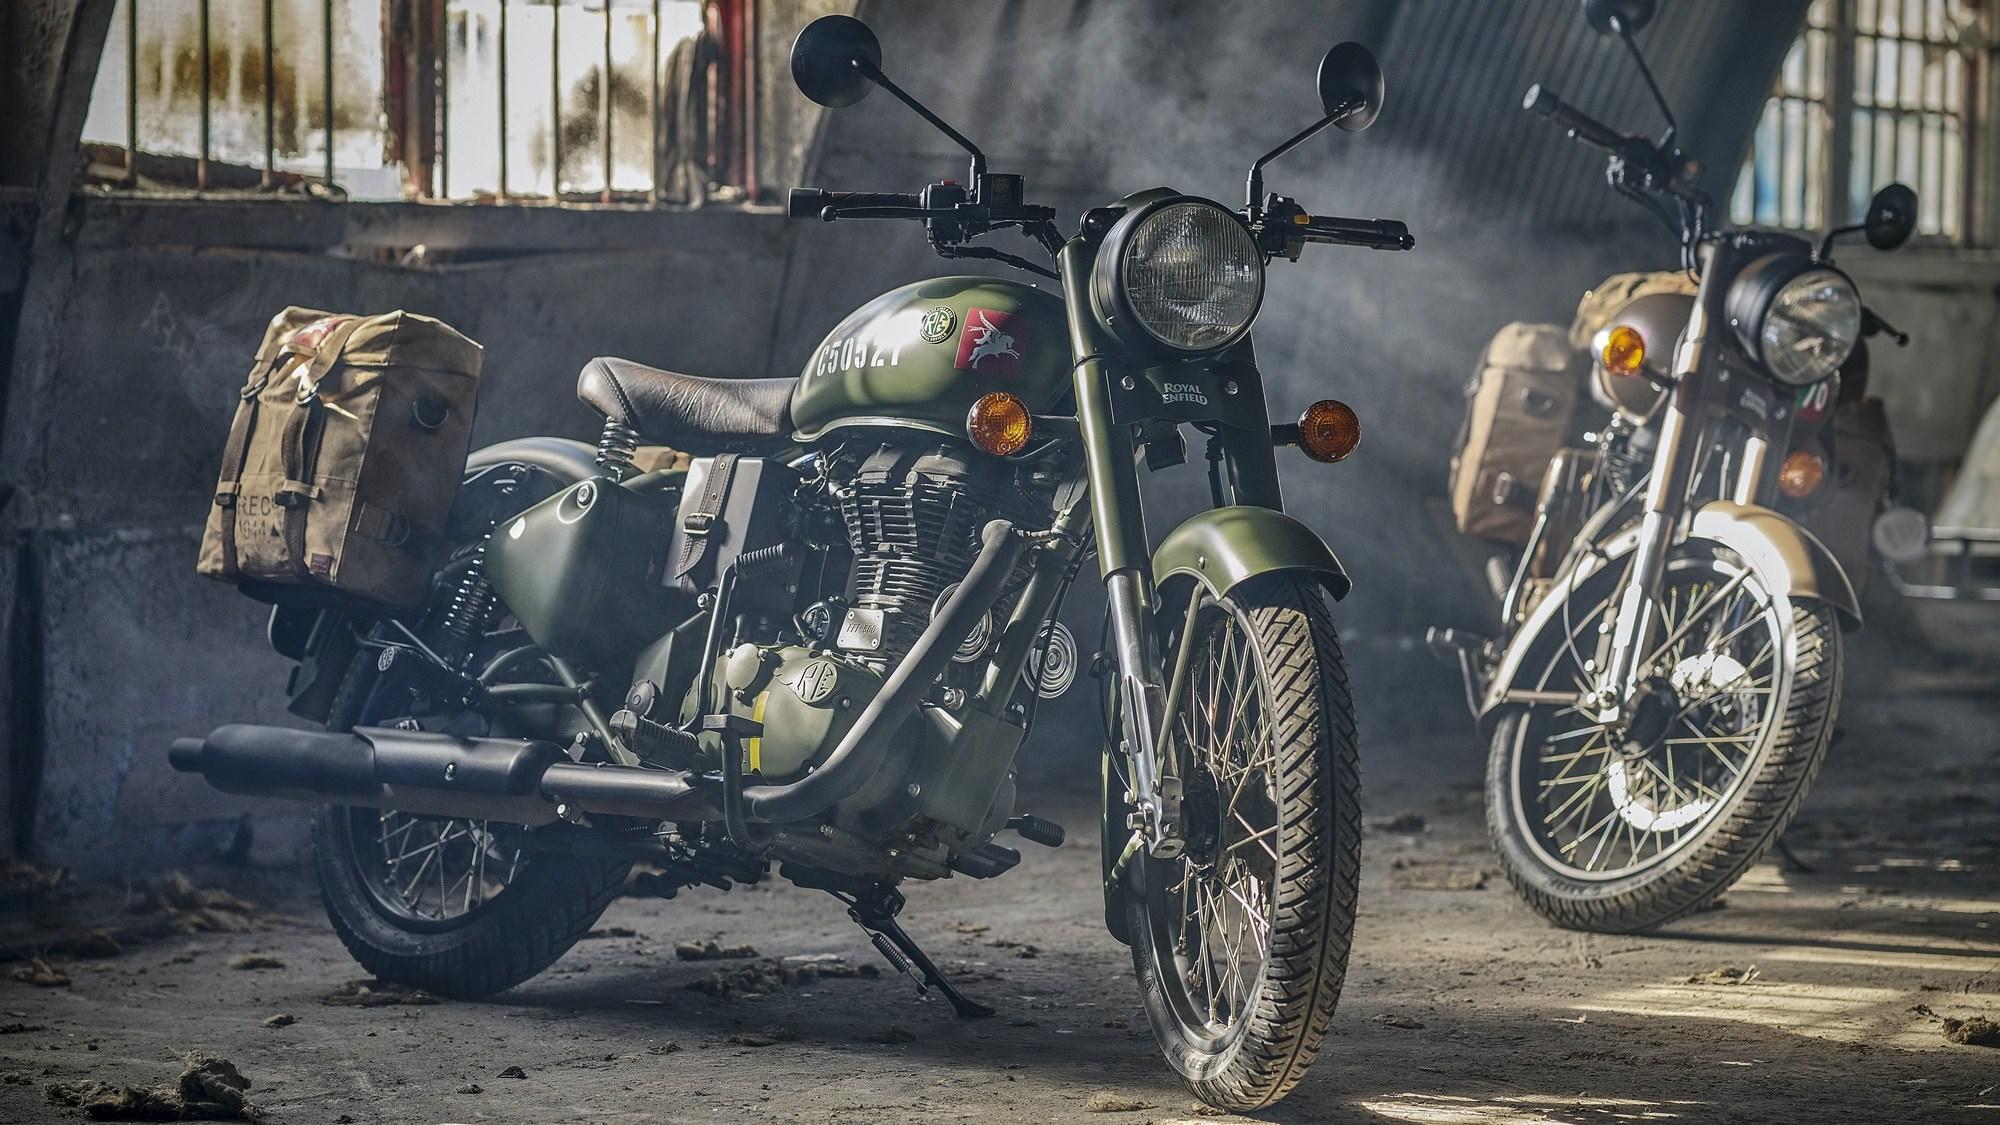 Royal Enfield Classic 350 ABS version- Ready to hit